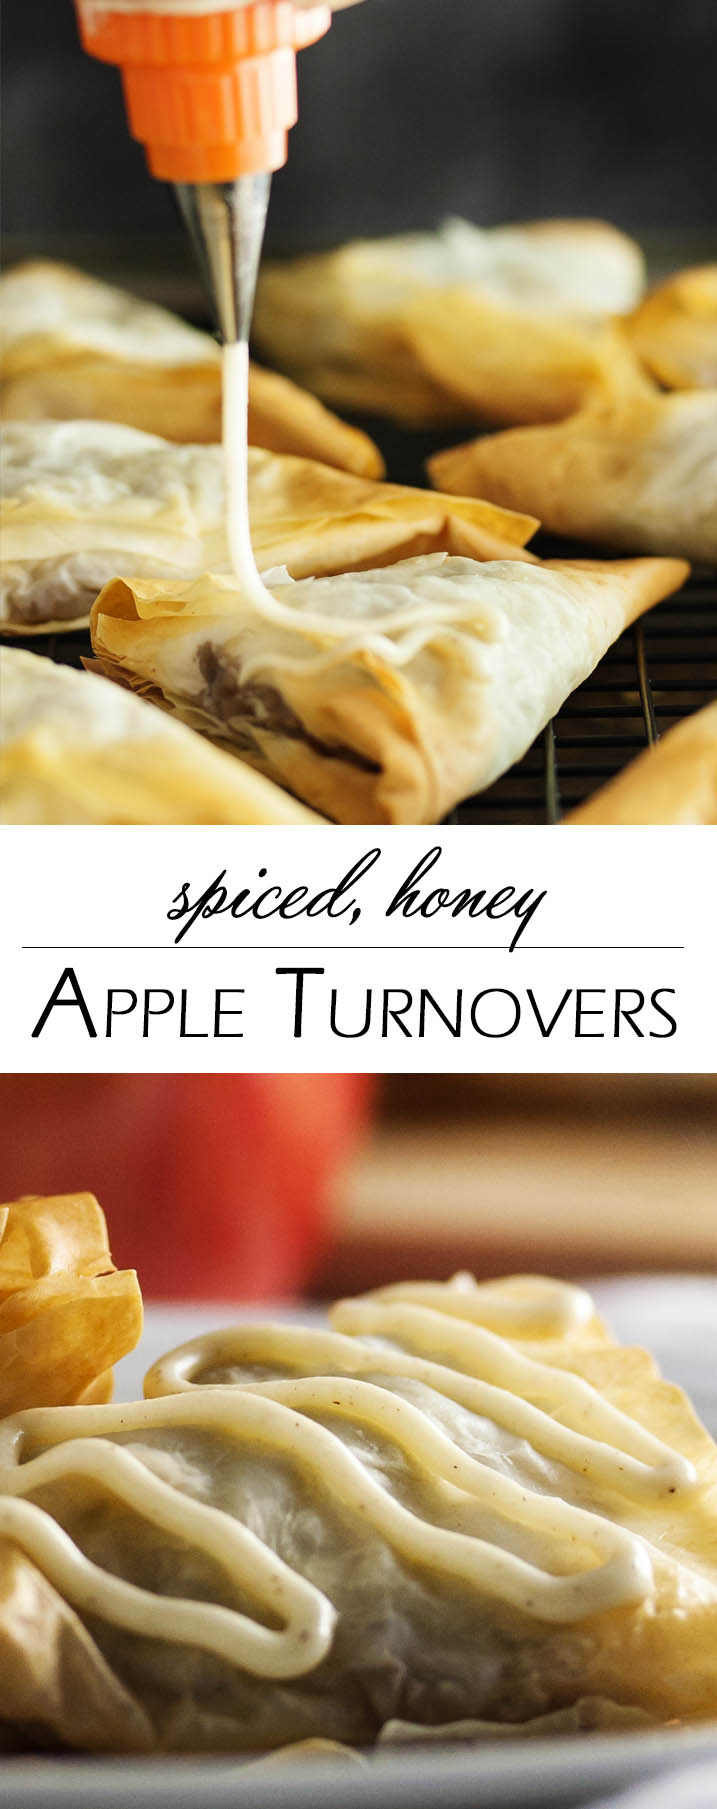 Spiced Honey Apple Turnovers - Layers of flaky fillo dough are wrapped around a filling of apples and honey all flavored with warm spices. Add a drizzle of honey icing on top and you have an apple turnover that will have you wanting more. | justalittlebitofbacon.com